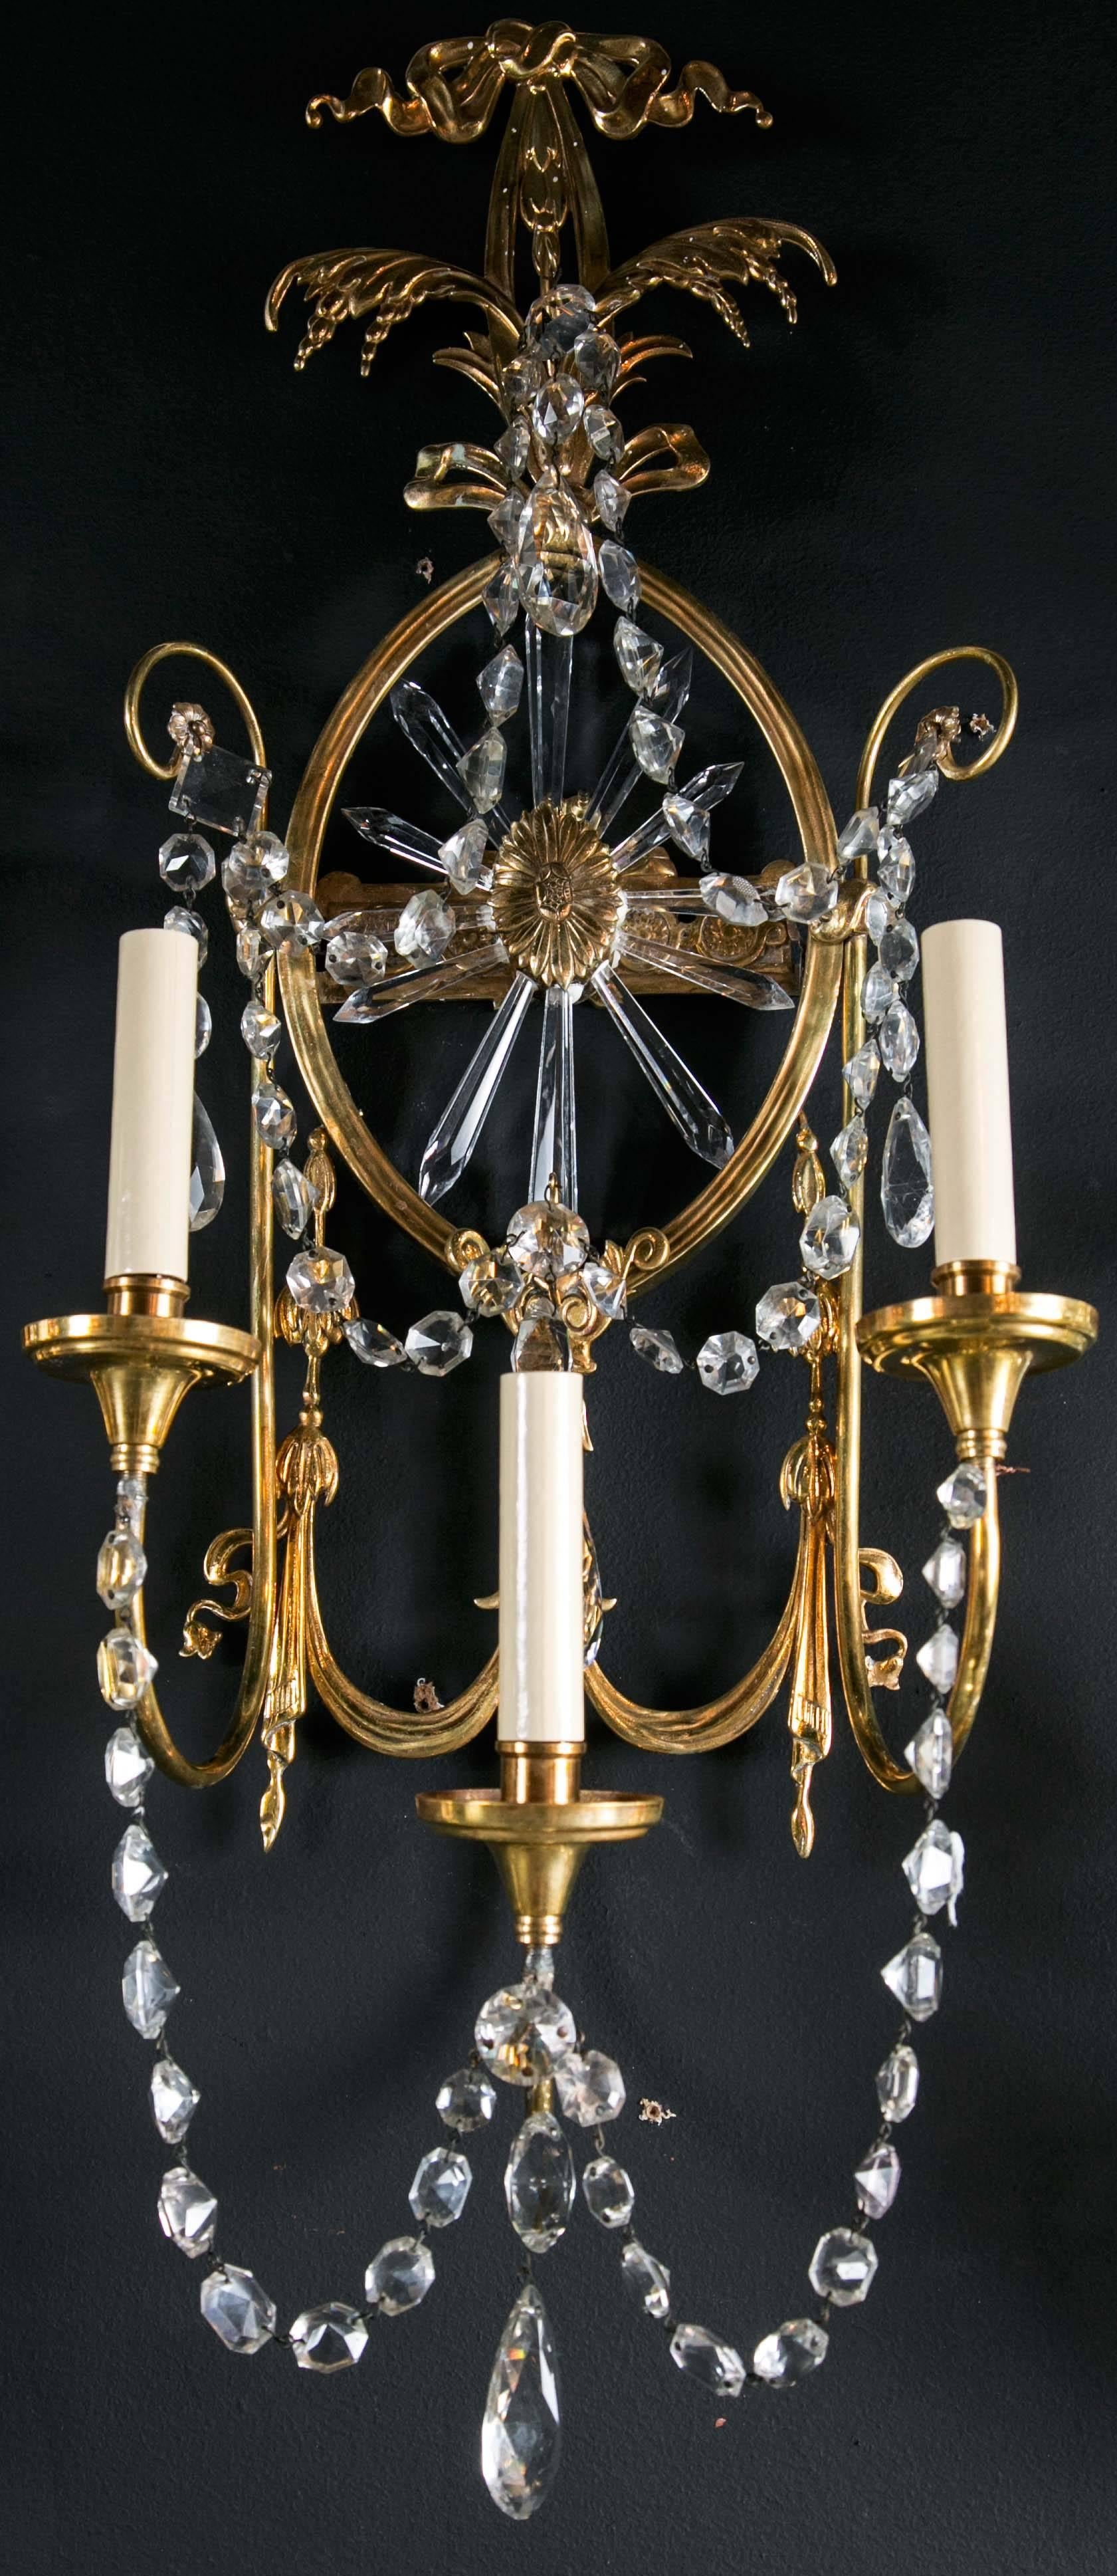 Pair of Large 1920 Caldwell Three-light Sconces with Sunburst Shaped Crystal In Excellent Condition For Sale In Stamford, CT